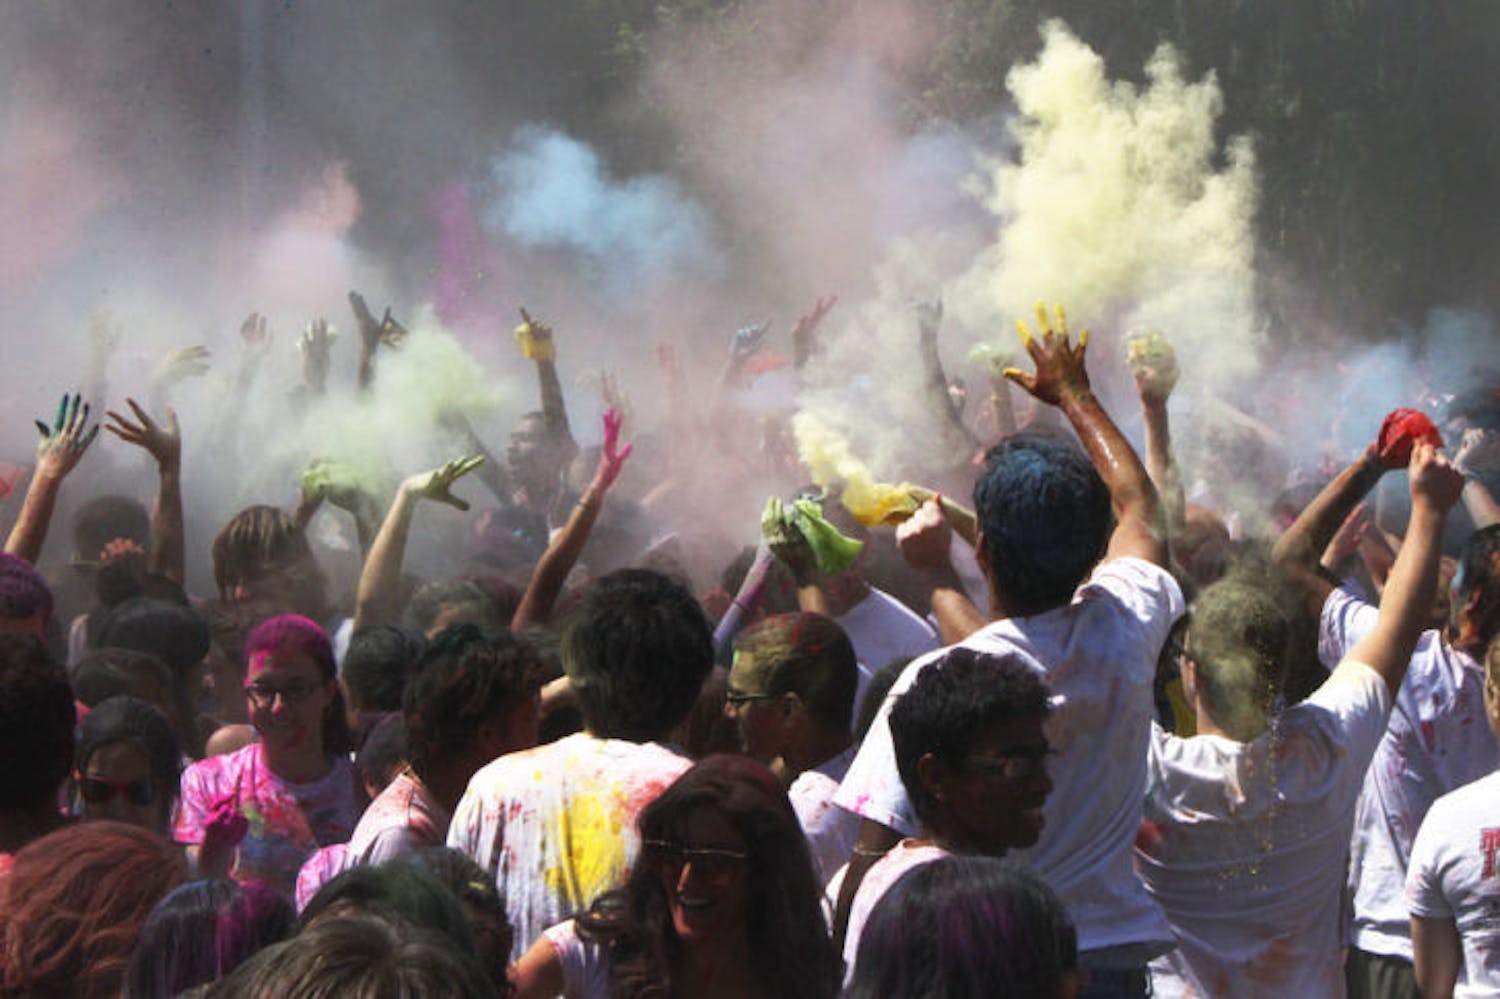 UF students gather on Hume Field on Saturday afternoon to throw colored powder on one another in celebration of the Hindu festival of Holi. The event was organized by the Indian Student Association, Student Government Multicultural Affairs Cabinet and UF Intercultural Engagement.